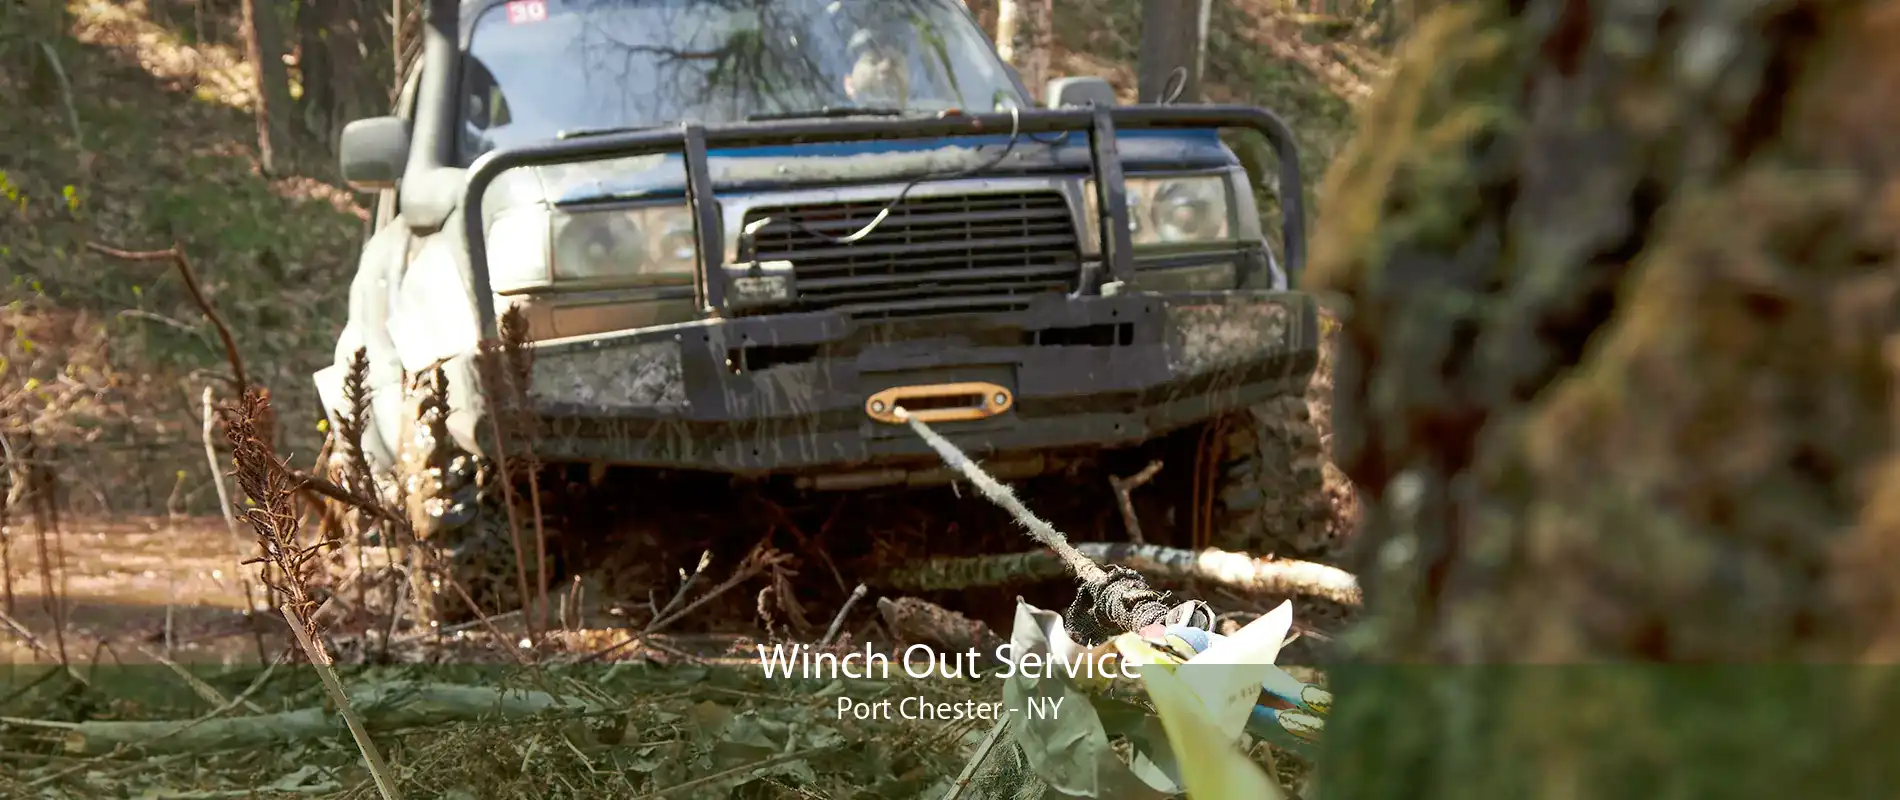 Winch Out Service Port Chester - NY